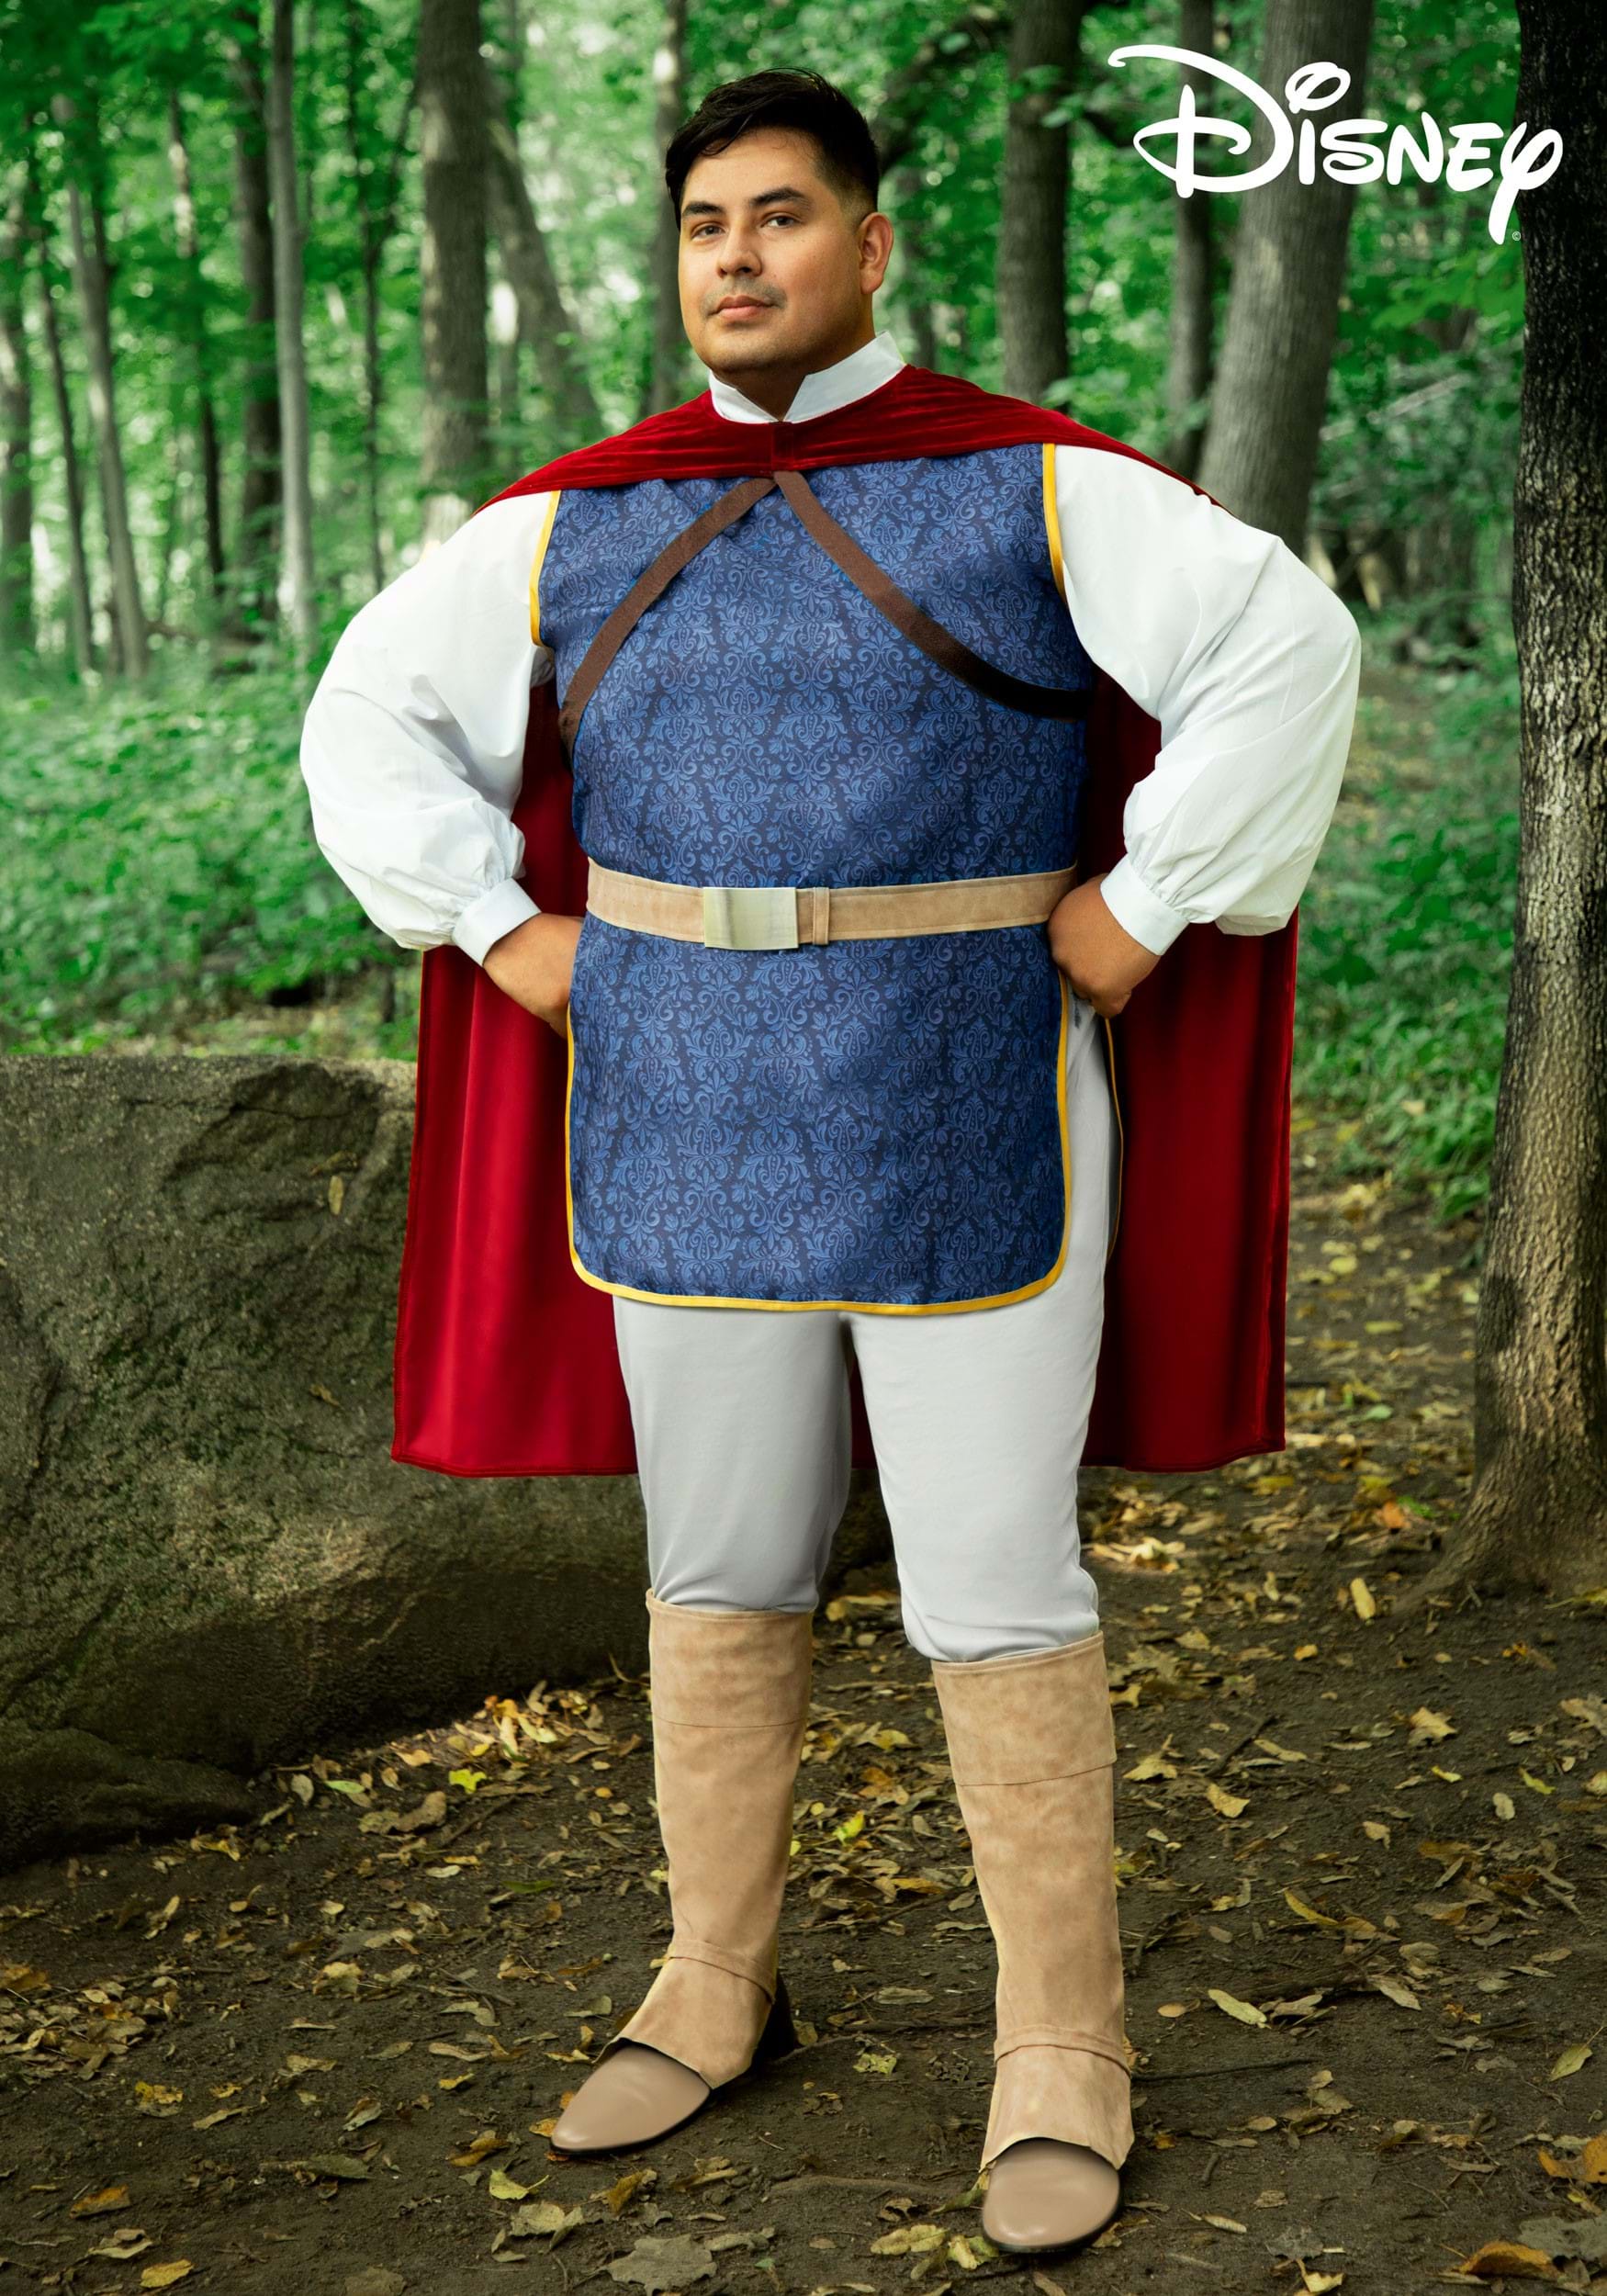 https://images.fun.com/products/68964/1-1/mens-snow-white-prince-plus-costume-upd.jpg